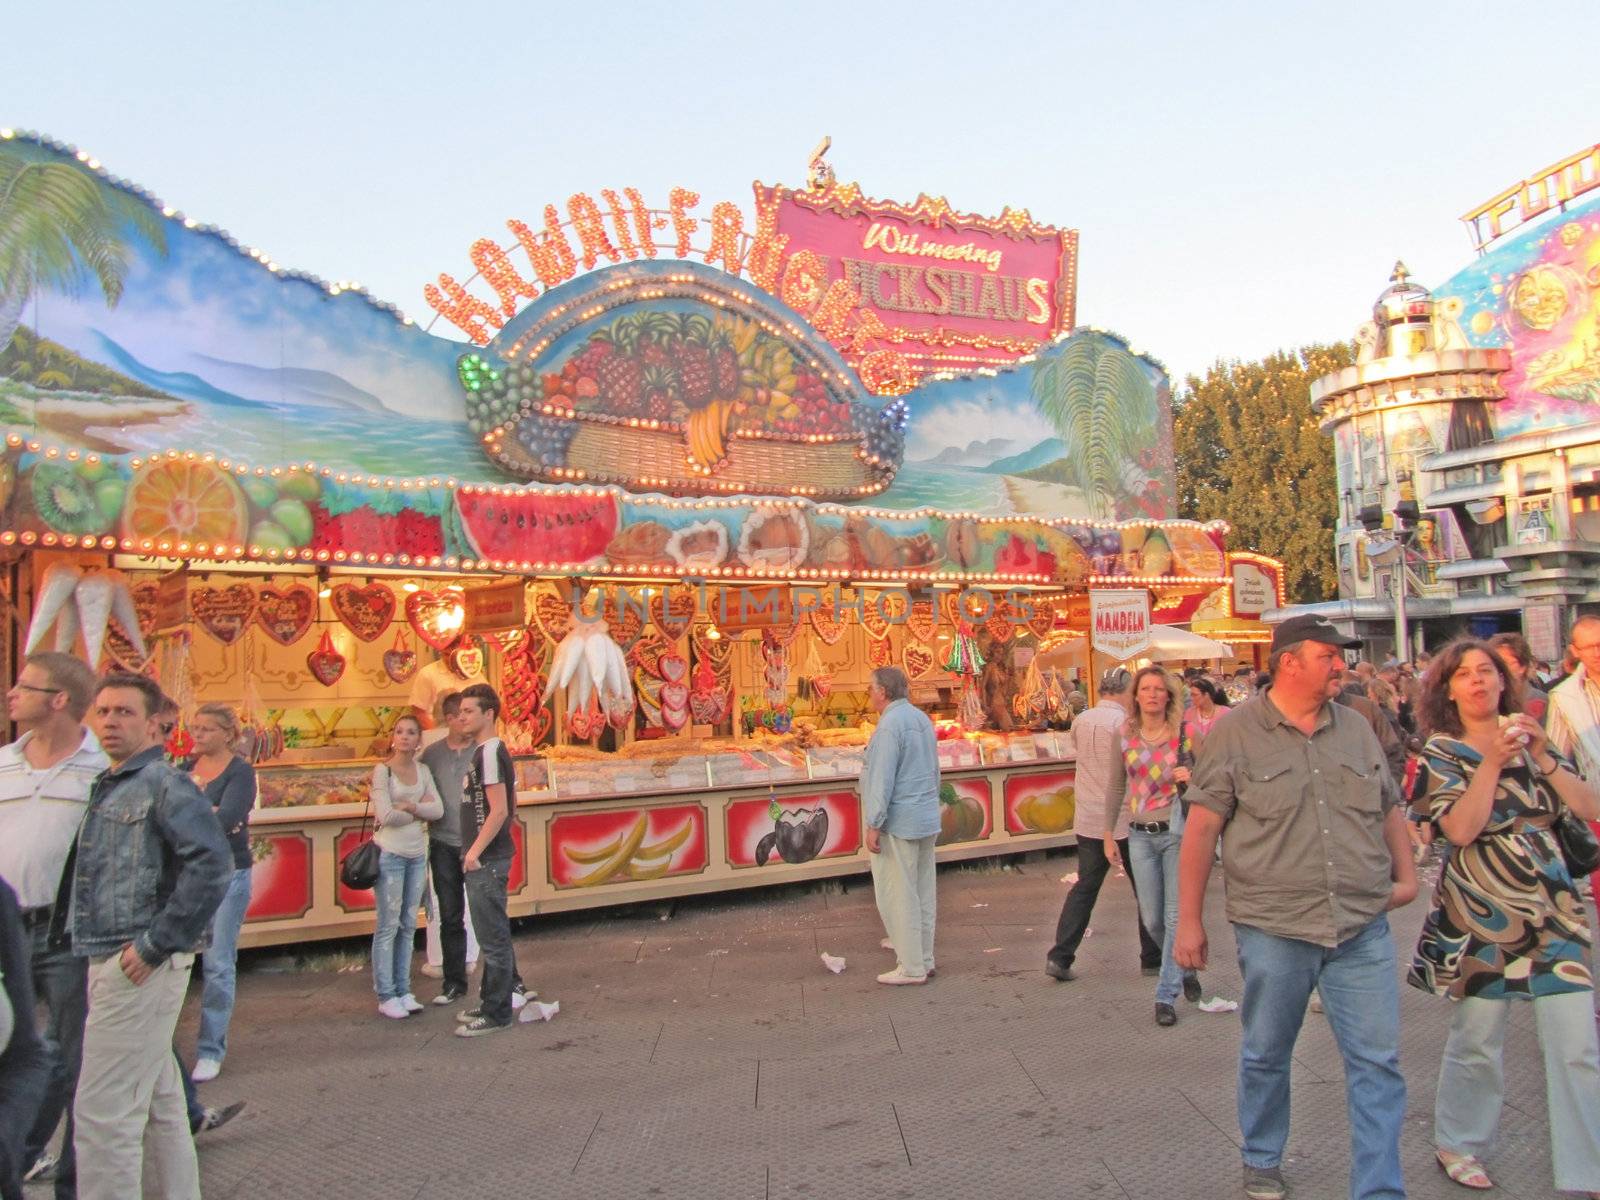 DUSSELDORF, GERMANY - JULY 24: Unidentified visitors near a gingerbread food stall at Kirmes on July 24, 2010 in Dusseldorf, Germany. Kirmes is the biggest summer fair on the north Rhein in Germany.